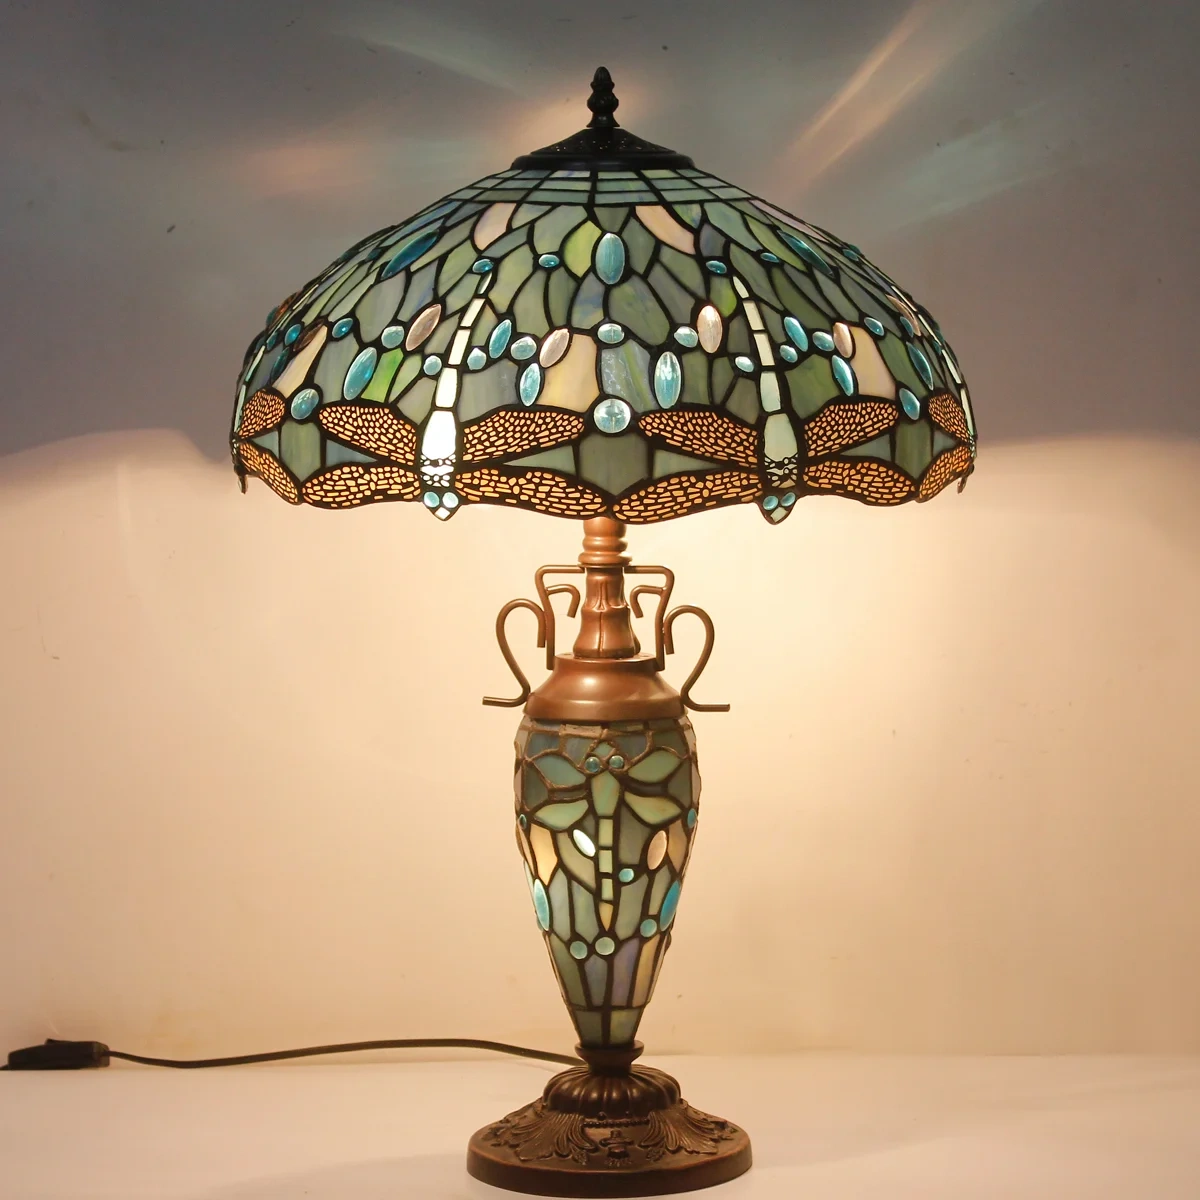 Tiffany Table Lamp With Nightlight Rustic Large 24